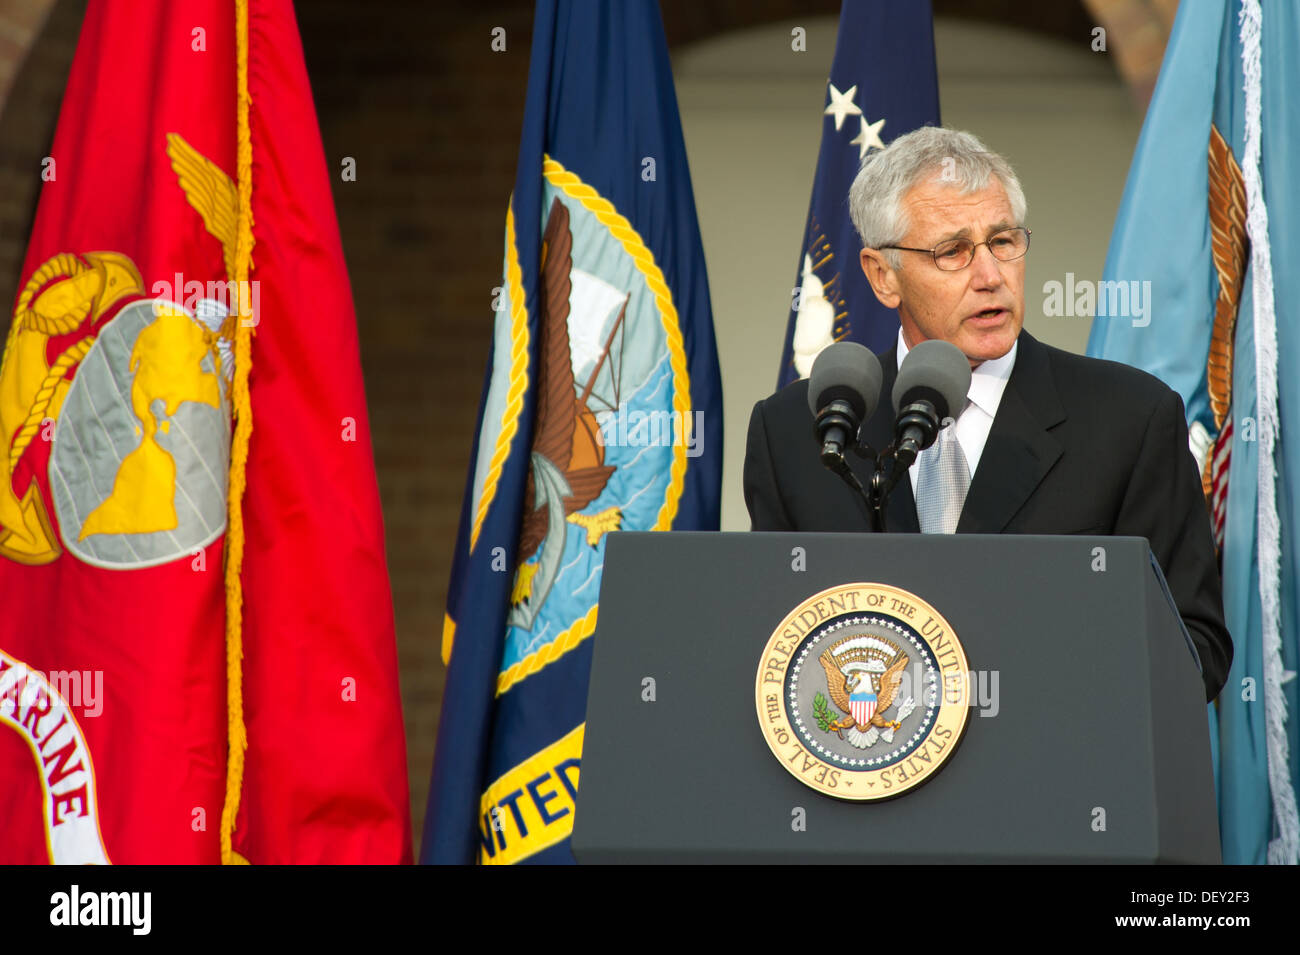 Defense Secretary Chuck Hagel speaks during a memorial for those killed during a shooting at the Navy Yard, at the Marine Barracks in Washington D.C., Sept. 22, 2013. 12 people were killed Sept. 18, 2013. Stock Photo